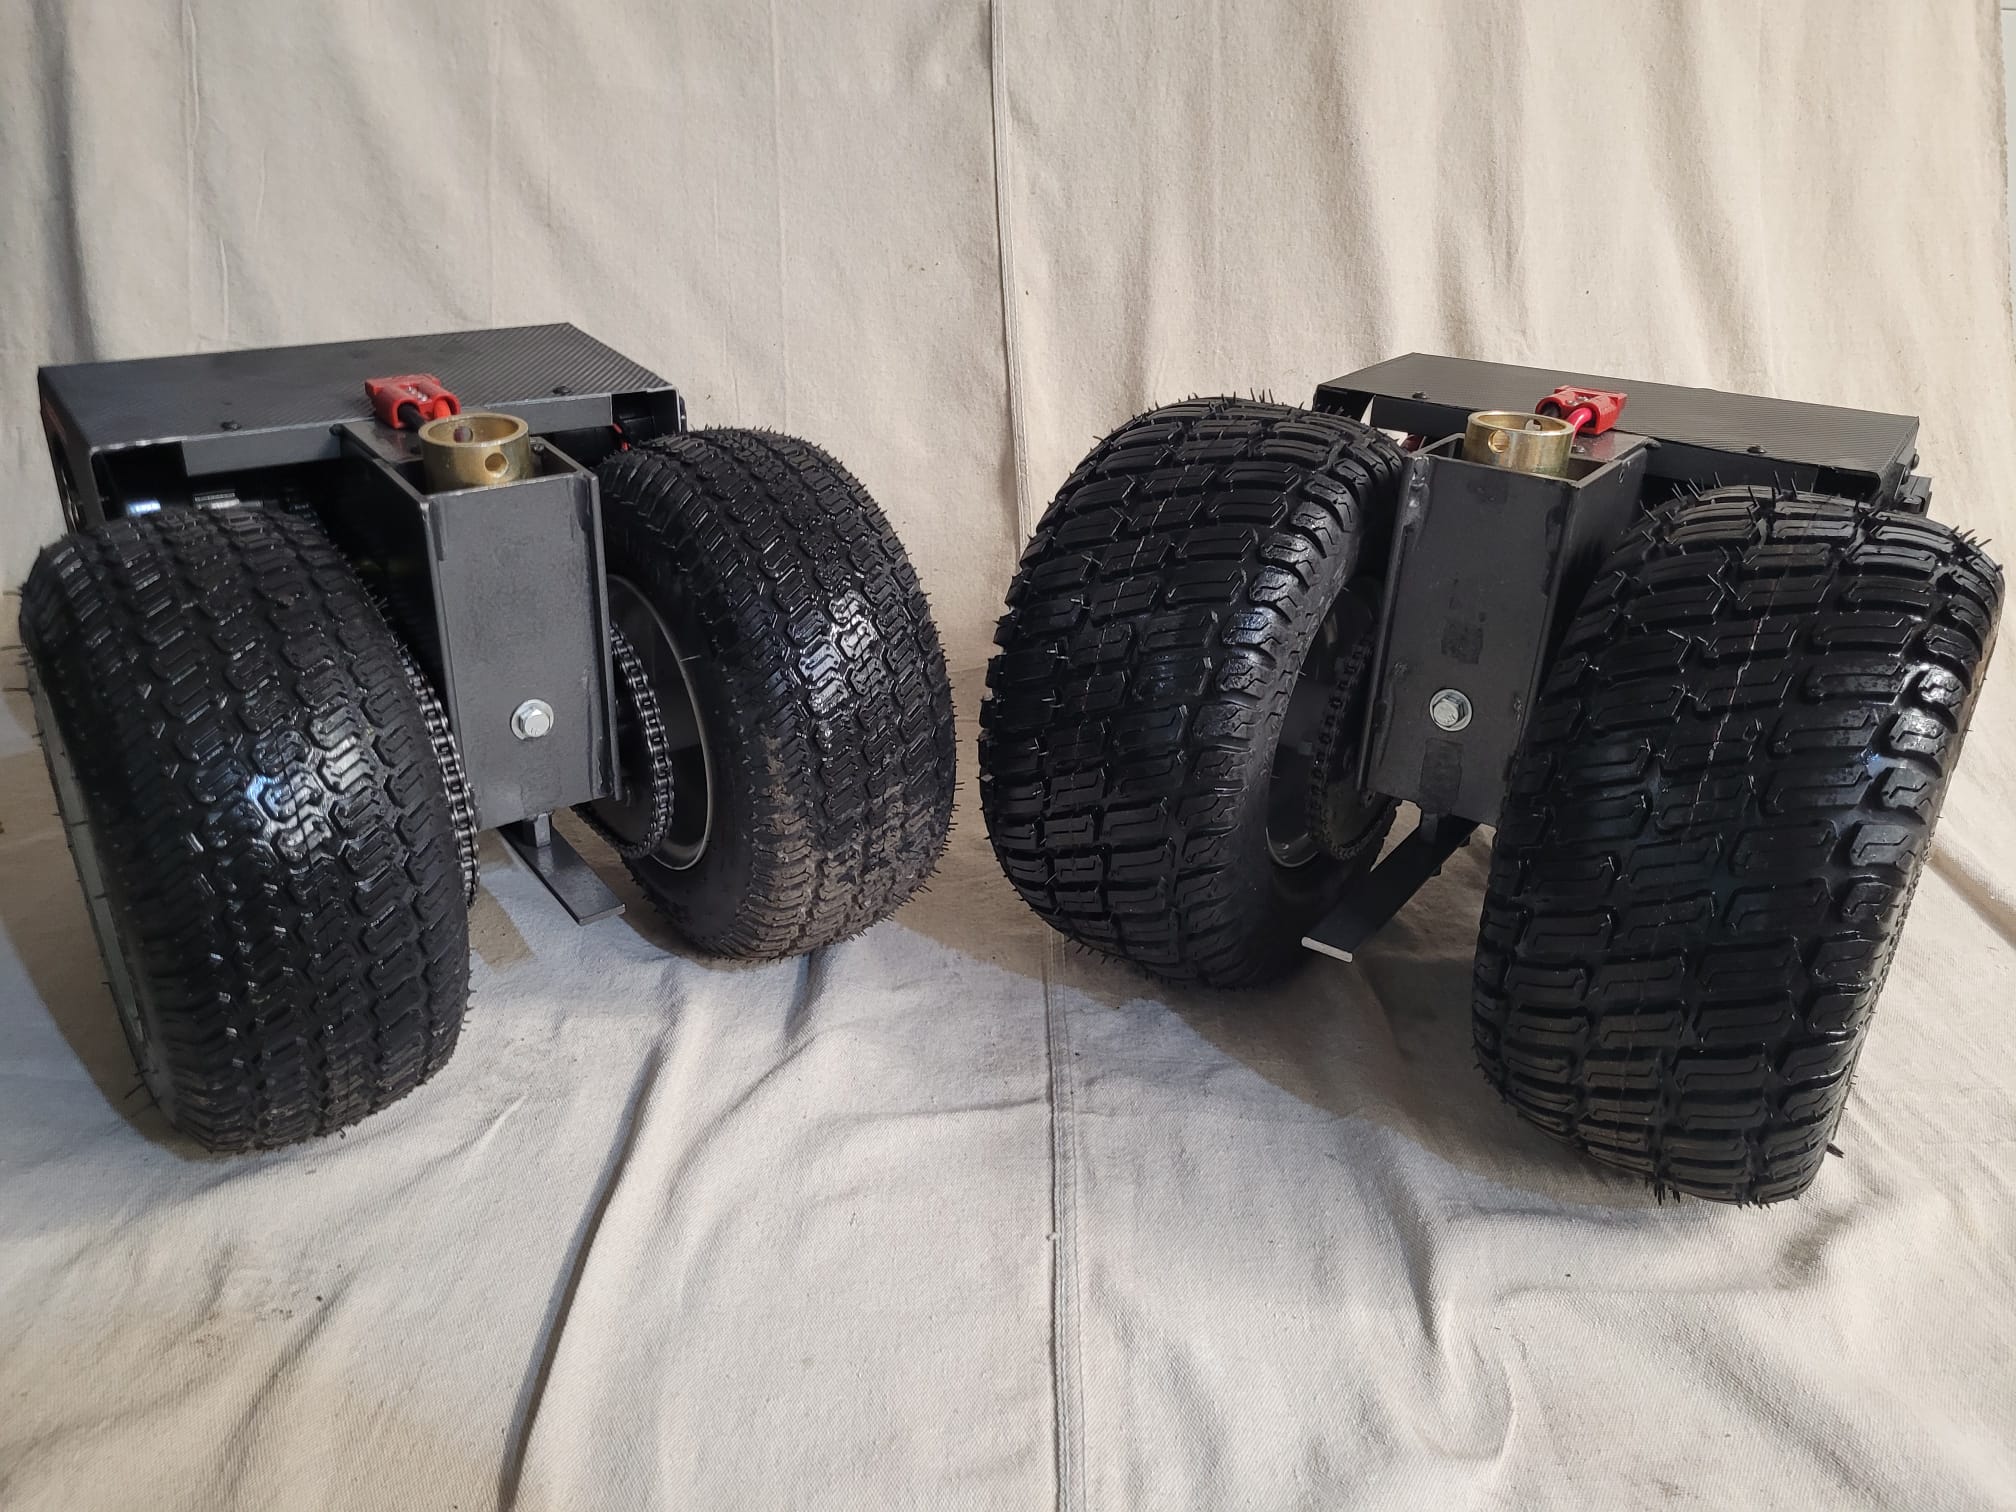 Back view of two wireless remote controlled trailer mover dollies